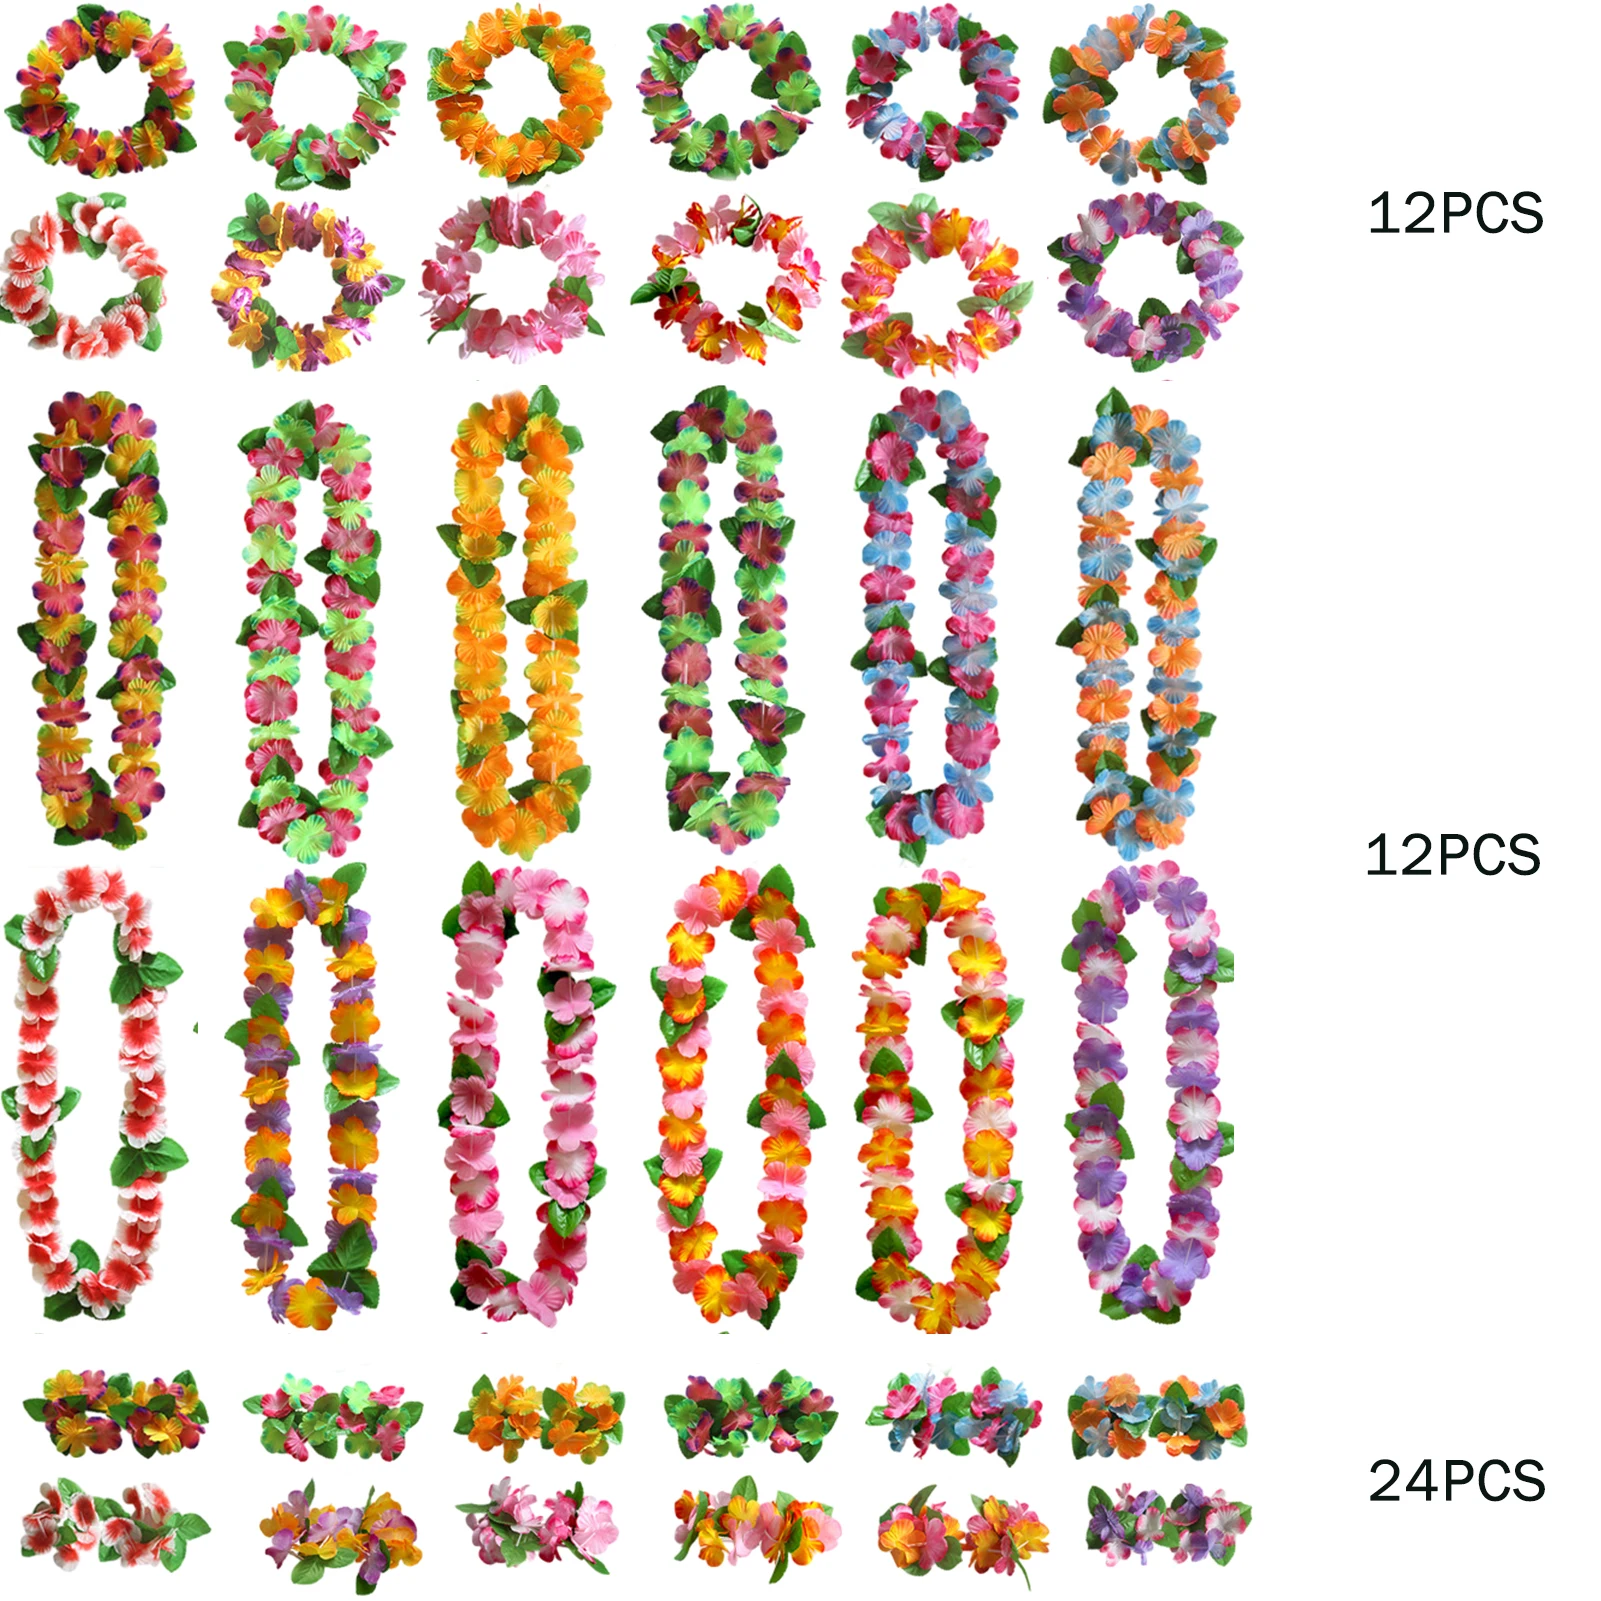 

48pcs Party Decorations Fancy Cloth Artificial Holiday Garlands Hawaiian Lei Tropical Beach Colorful Garland Necklace Chains